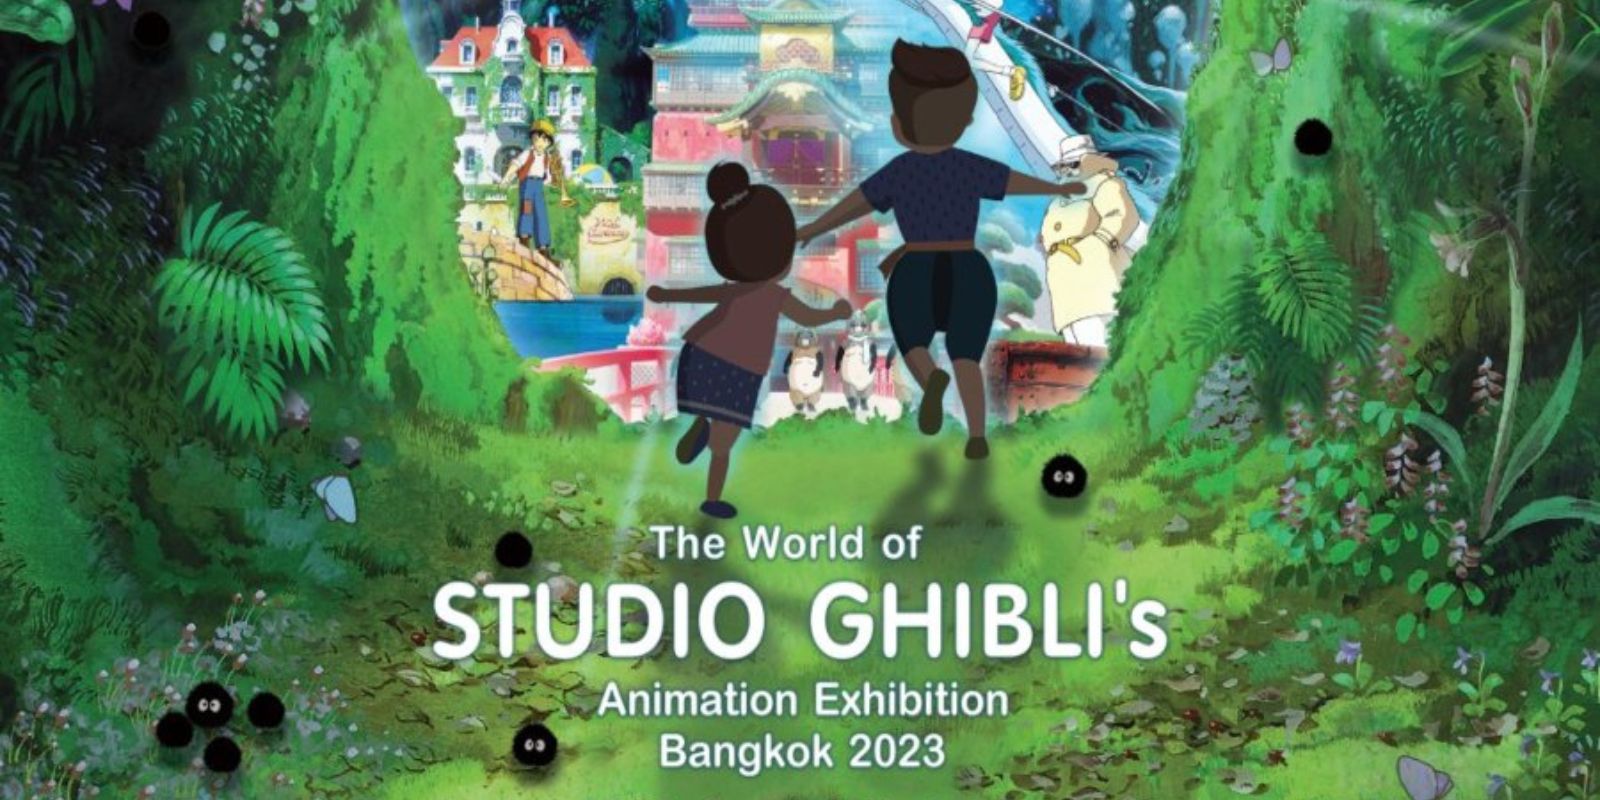 Visit The World of Studio Ghibli's' exhibition July 1 - September 30, 2023